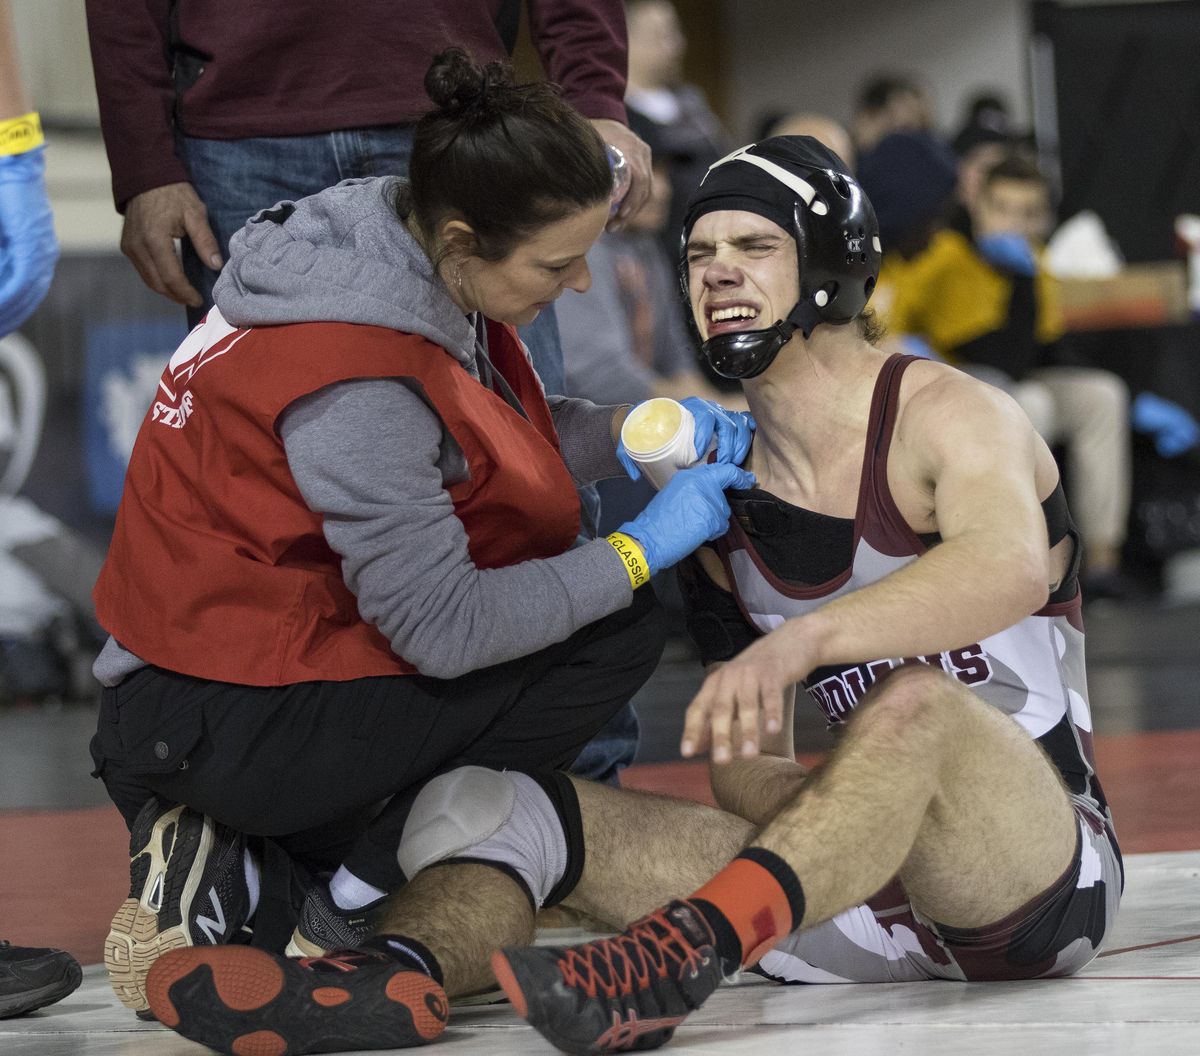 Colville’s Reuben Seeman, right, was winning his match with Sultan’s Aidan Fleming until he reinjured his shoulder late in the third period during their 132-pound match at State 1A wrestling in Tacoma on Friday, Feb. 21, 2020. (Patrick Hagerty / For The Spokesman-Review)